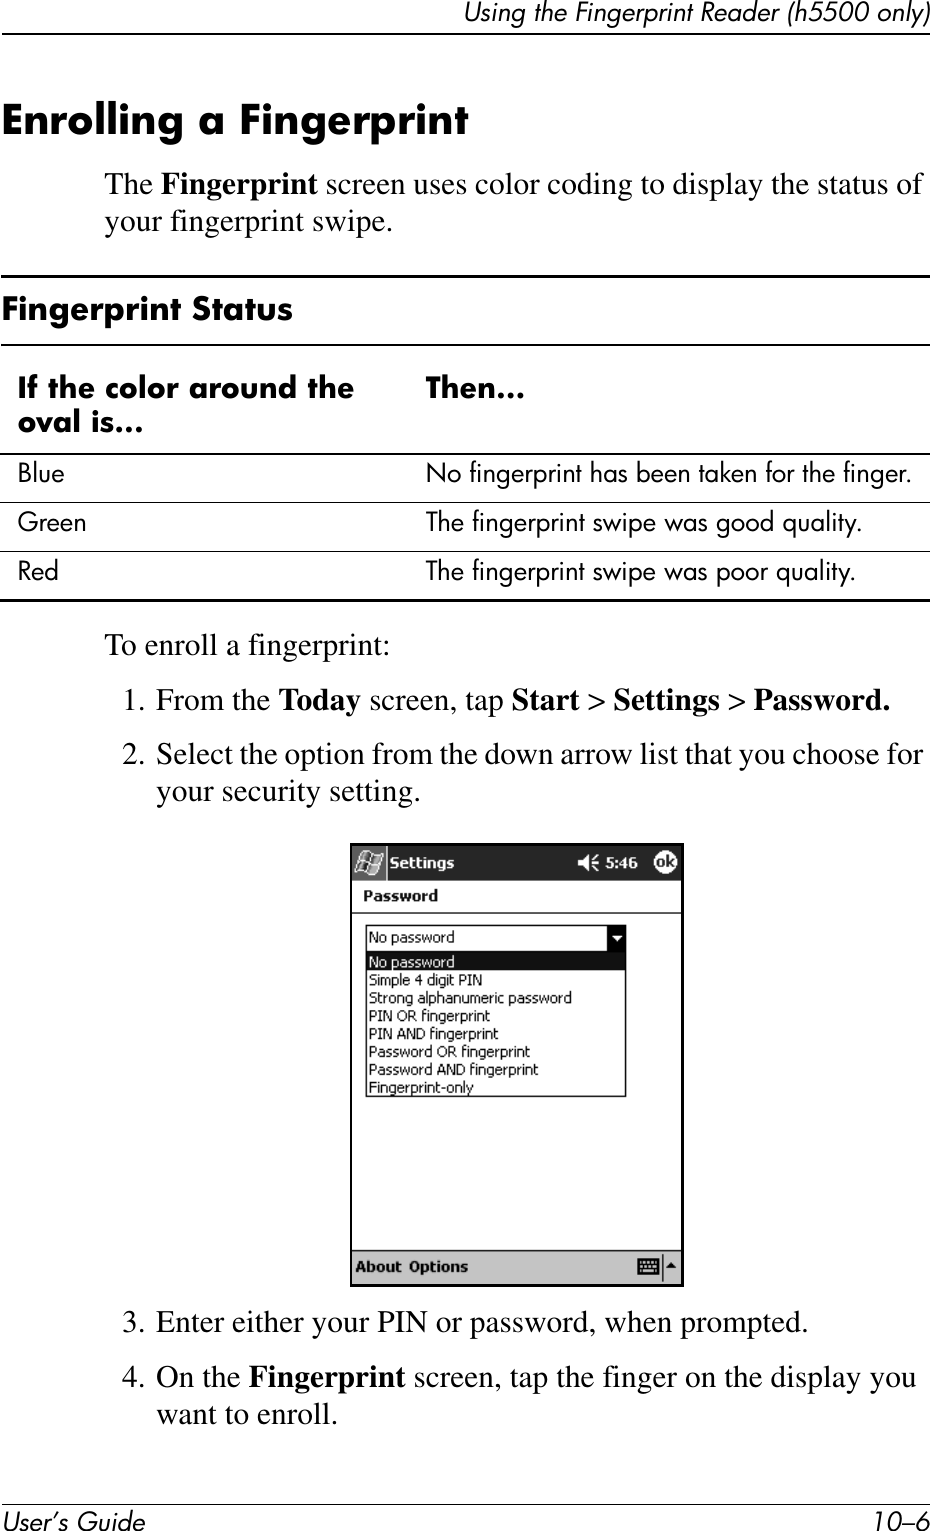 User’s Guide 10–6Using the Fingerprint Reader (h5500 only)Enrolling a FingerprintThe Fingerprint screen uses color coding to display the status of your fingerprint swipe.To enroll a fingerprint:1. From the Today screen, tap Start &gt; Settings &gt; Password.2. Select the option from the down arrow list that you choose for your security setting.3. Enter either your PIN or password, when prompted.4. On the Fingerprint screen, tap the finger on the display you want to enroll.Fingerprint StatusIf the color around the oval is...Then...Blue No fingerprint has been taken for the finger.Green The fingerprint swipe was good quality.Red The fingerprint swipe was poor quality.